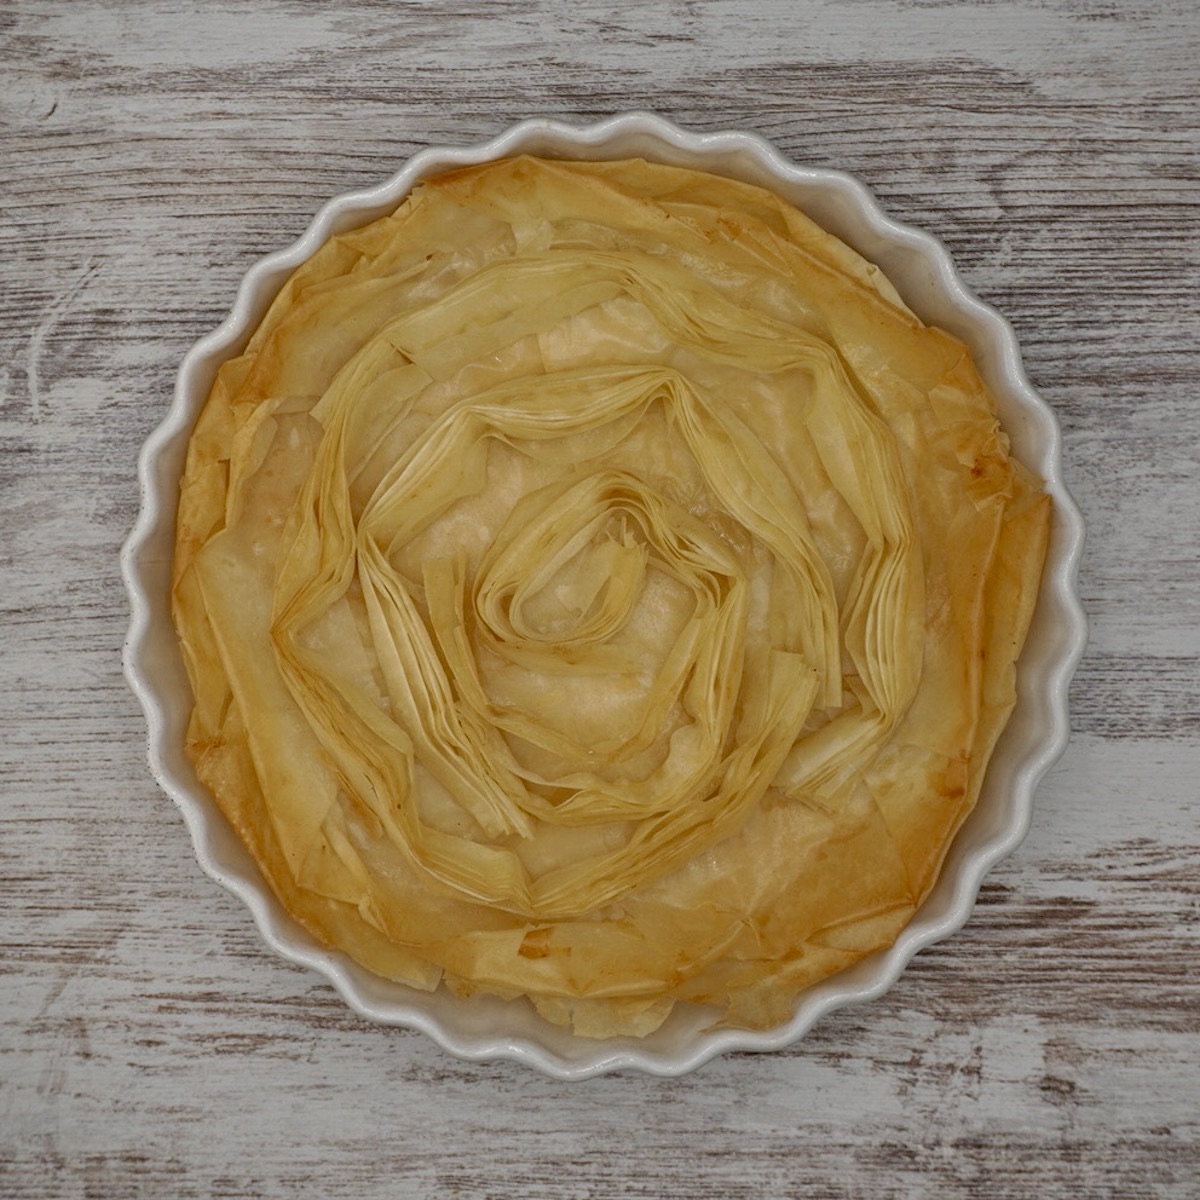 Baked filo pastry in the form of circles in a tart dish.